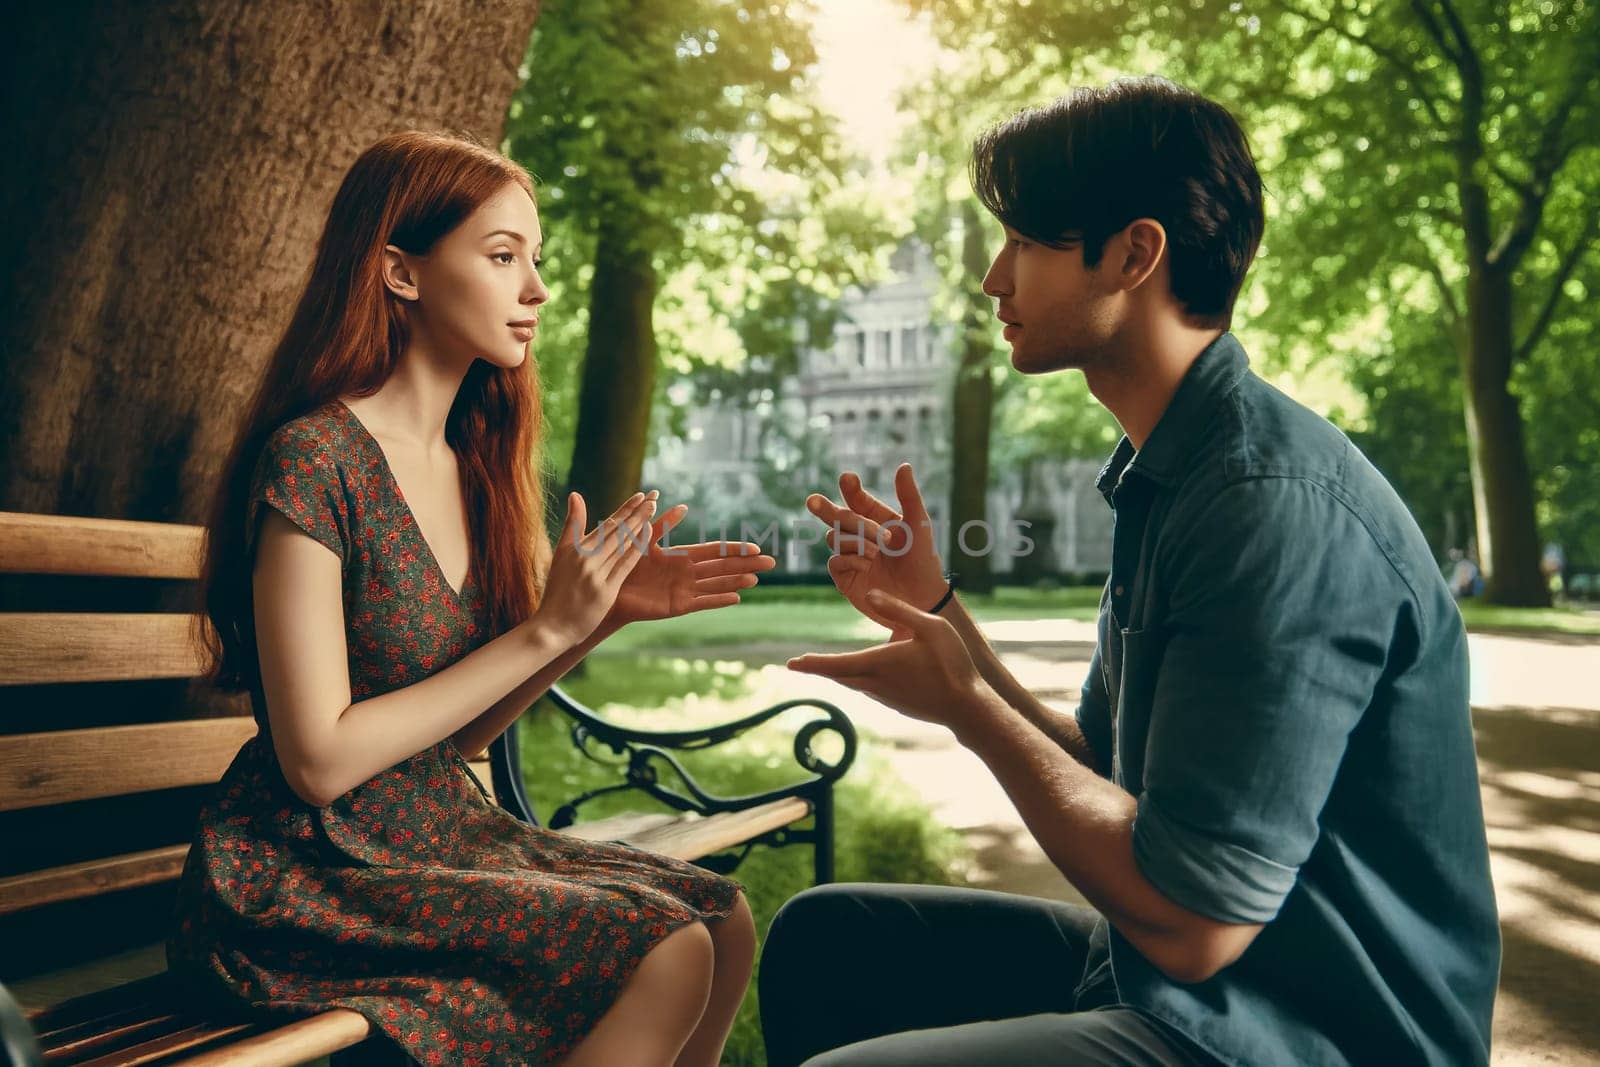 Deaf and mute guy and girl communicate using sign language in the park by Annado